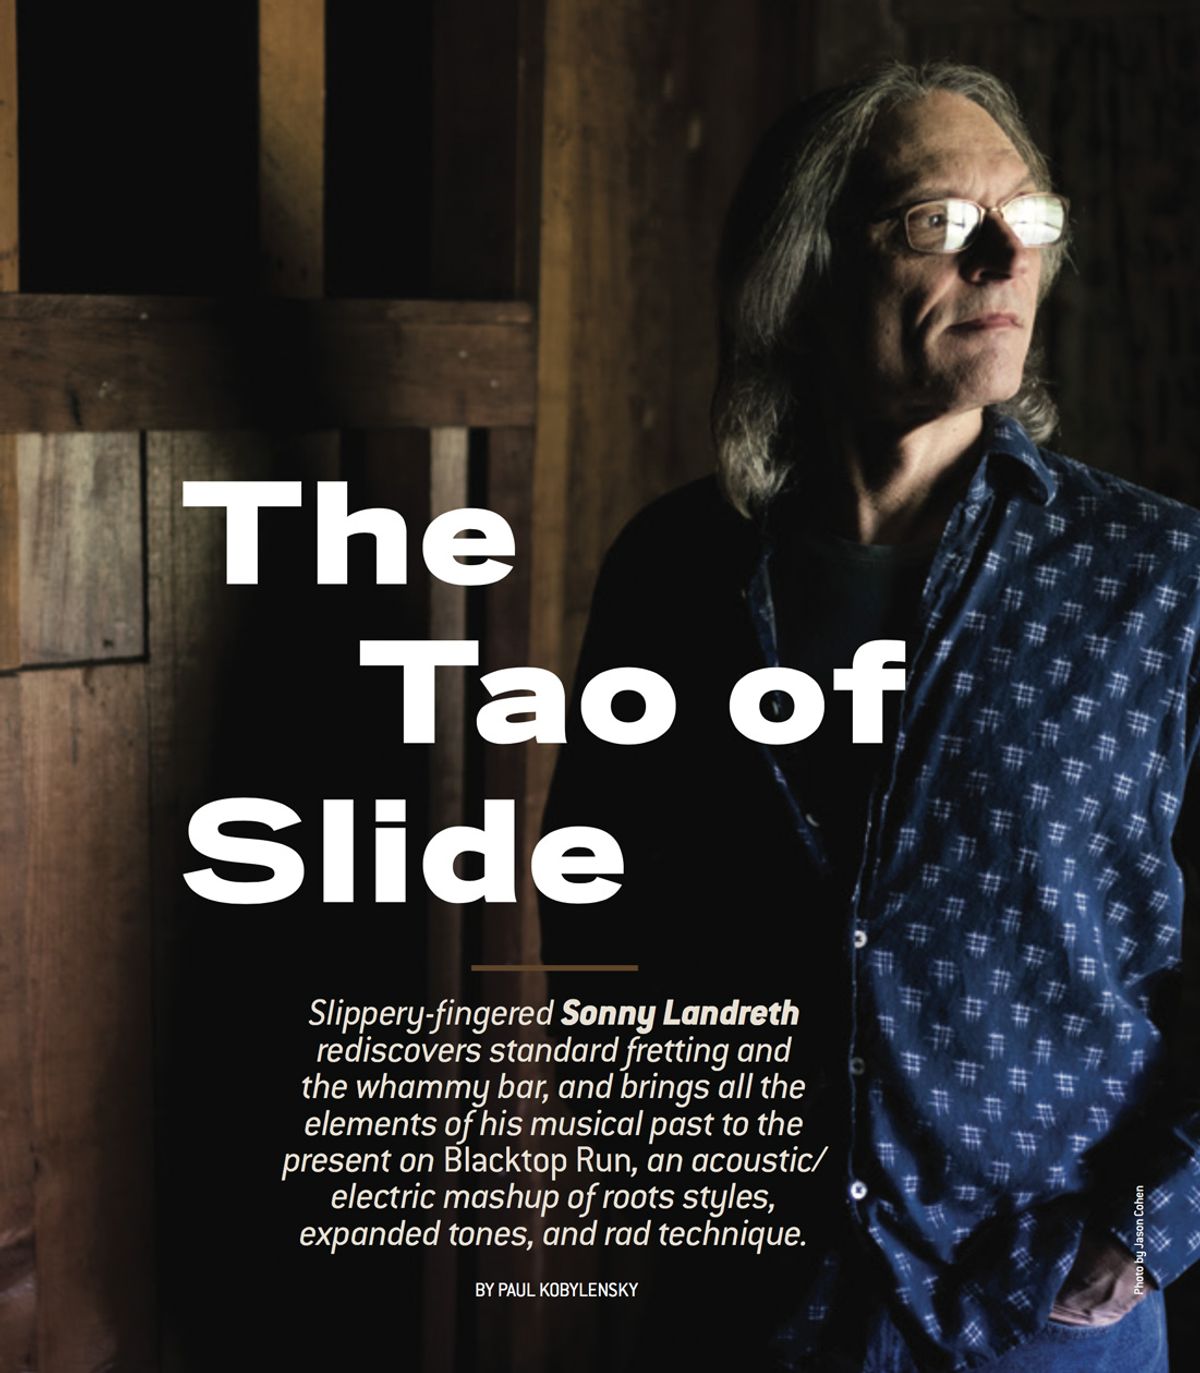 Sonny Landreth: "You Have to Have the Antenna Up"